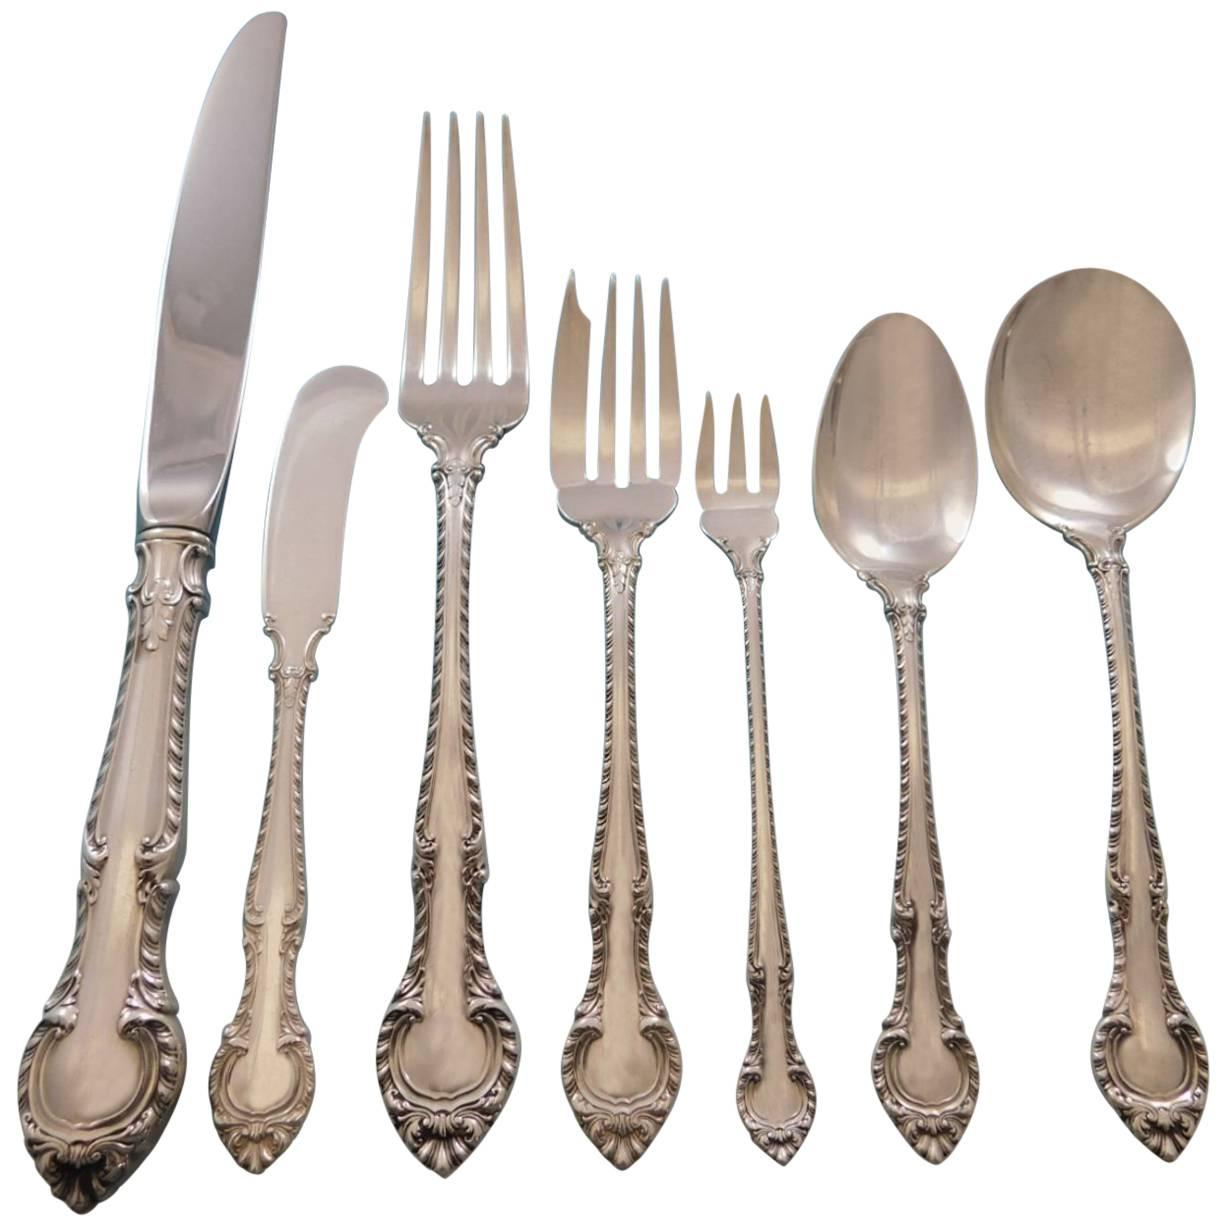 English Gadroon by Gorham Sterling Silver Flatware Set 12 Service 87 pcs Dinner